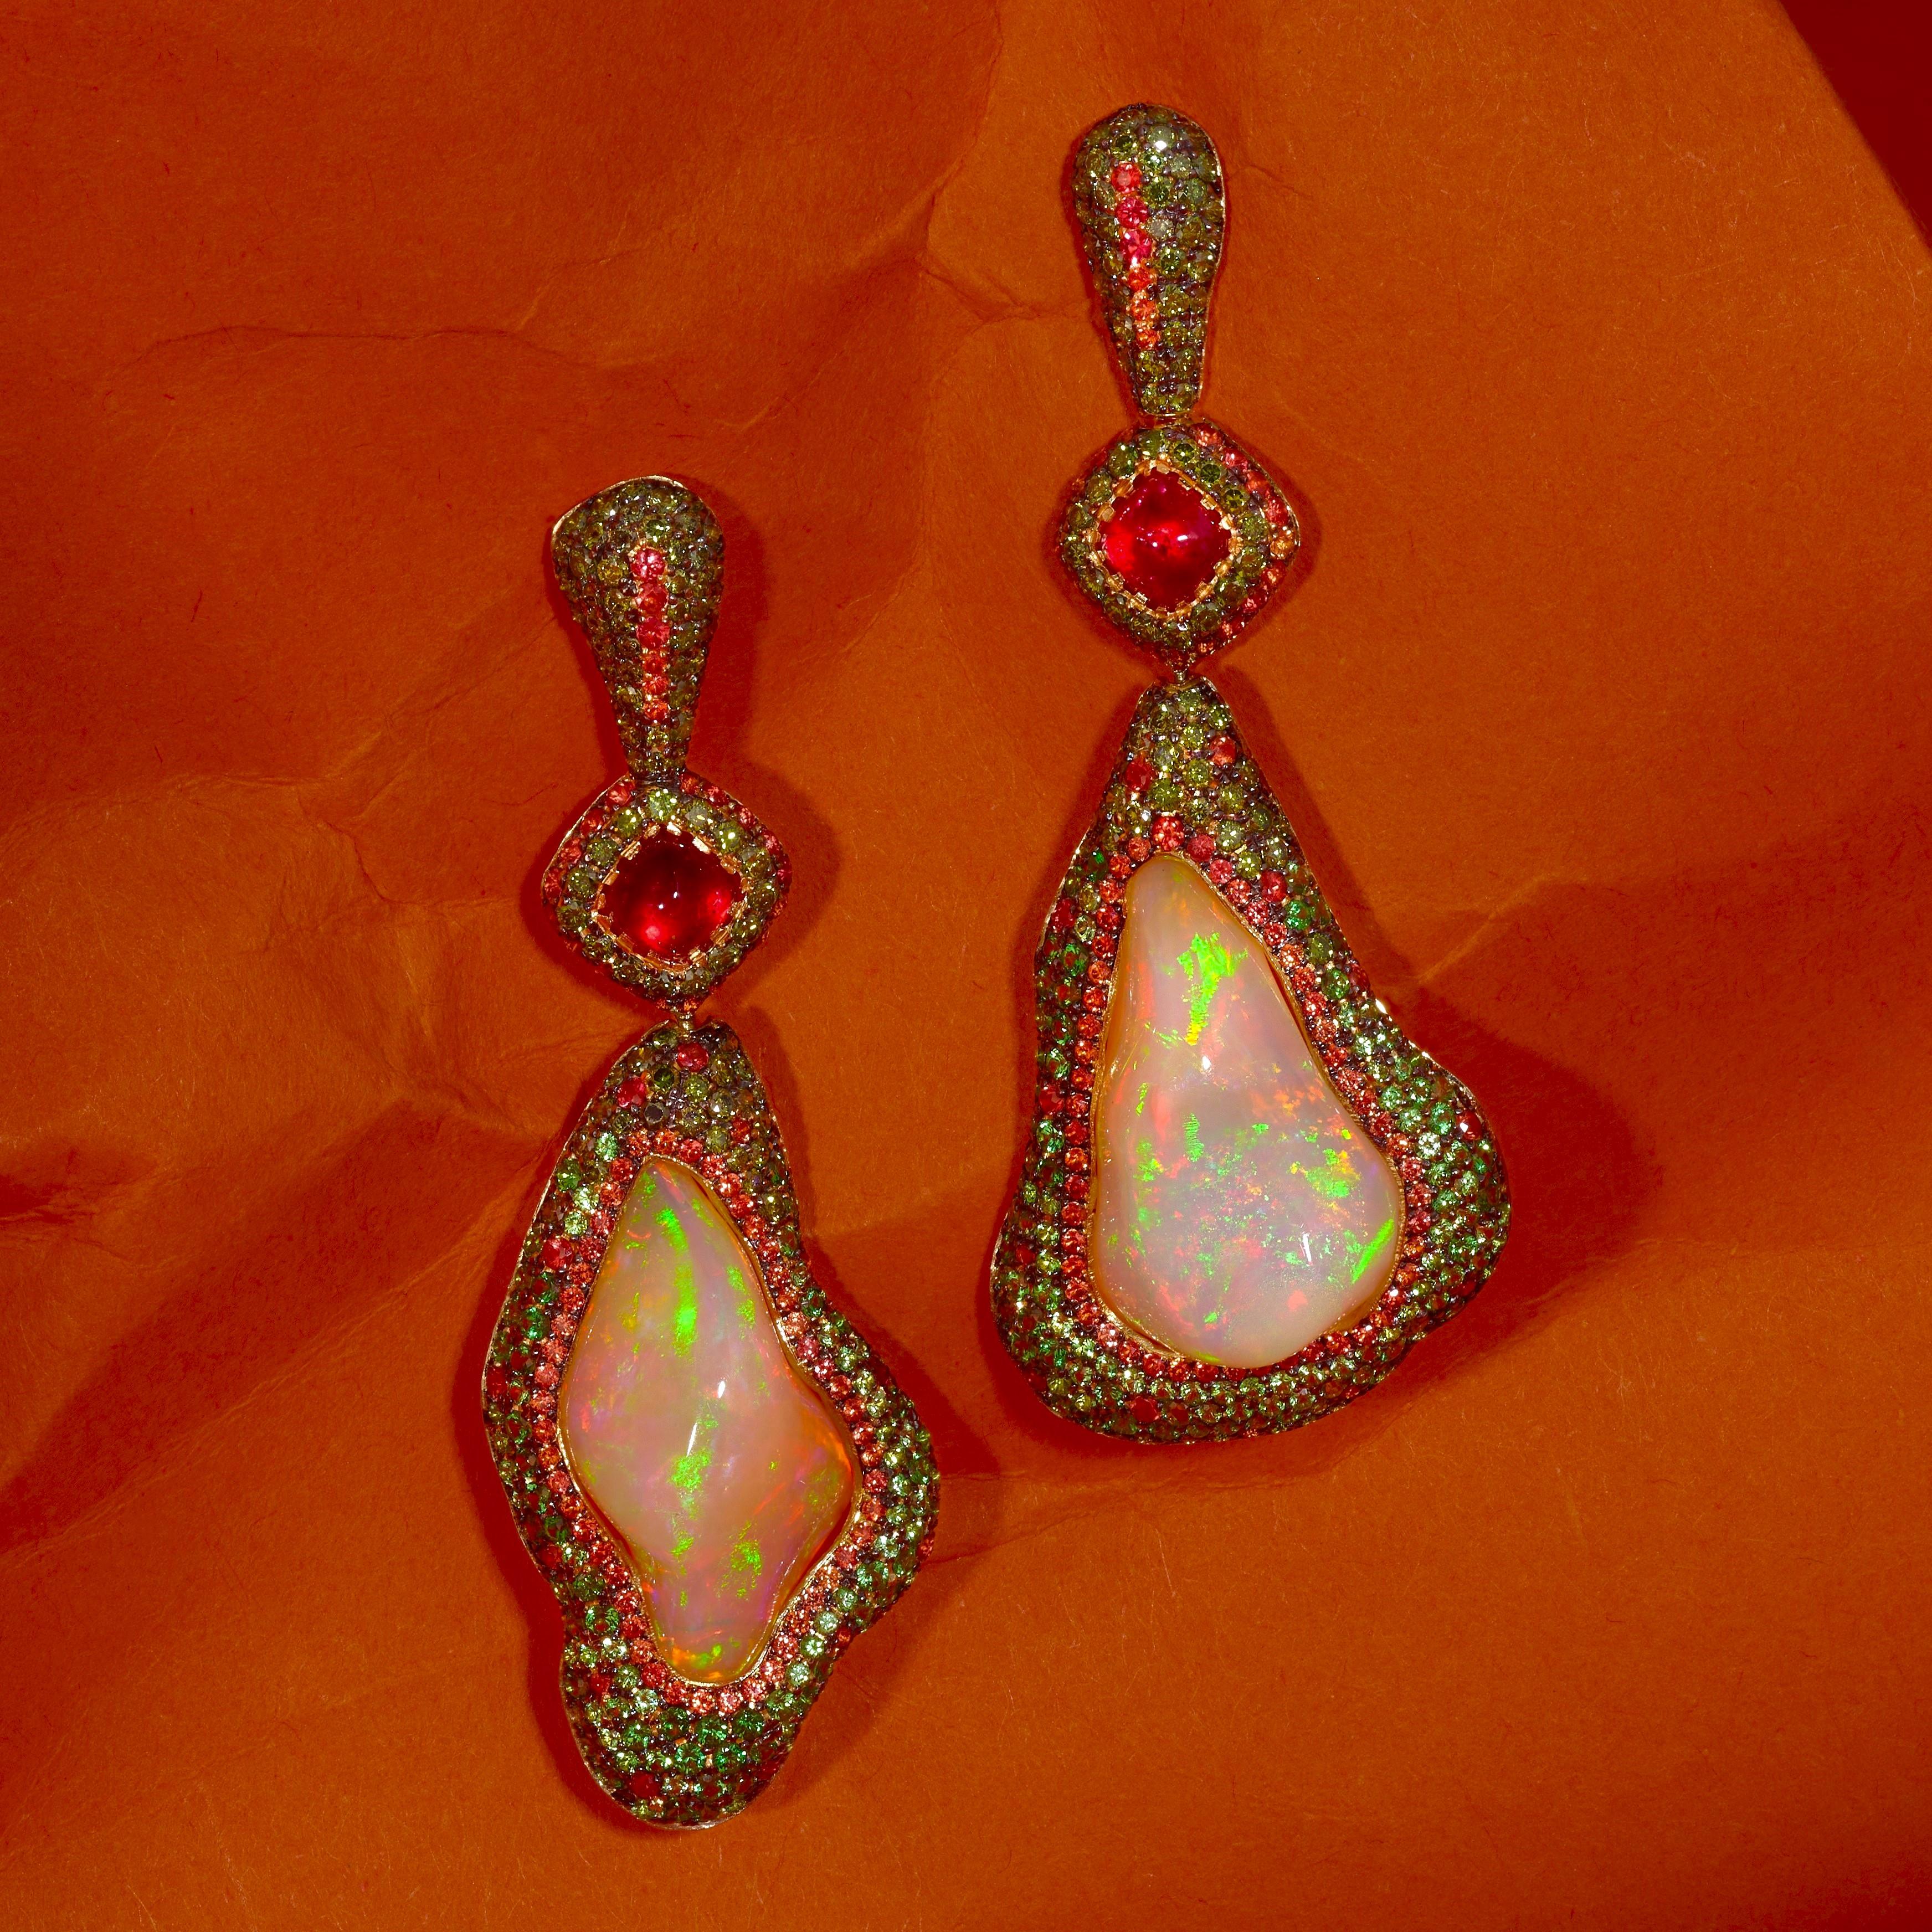 Contemporary Drop Earrings made by Rosior in Portugal made in yellow gold and set with:
- 2 white opals weighing 16,17 ct;
- 2 sugarloaf cut red spinels weighing 1,58 ct;
- 216 tsavorites weighing 1,50 ct;
- 179 orange sapphires weighing 1,41 ct;
-